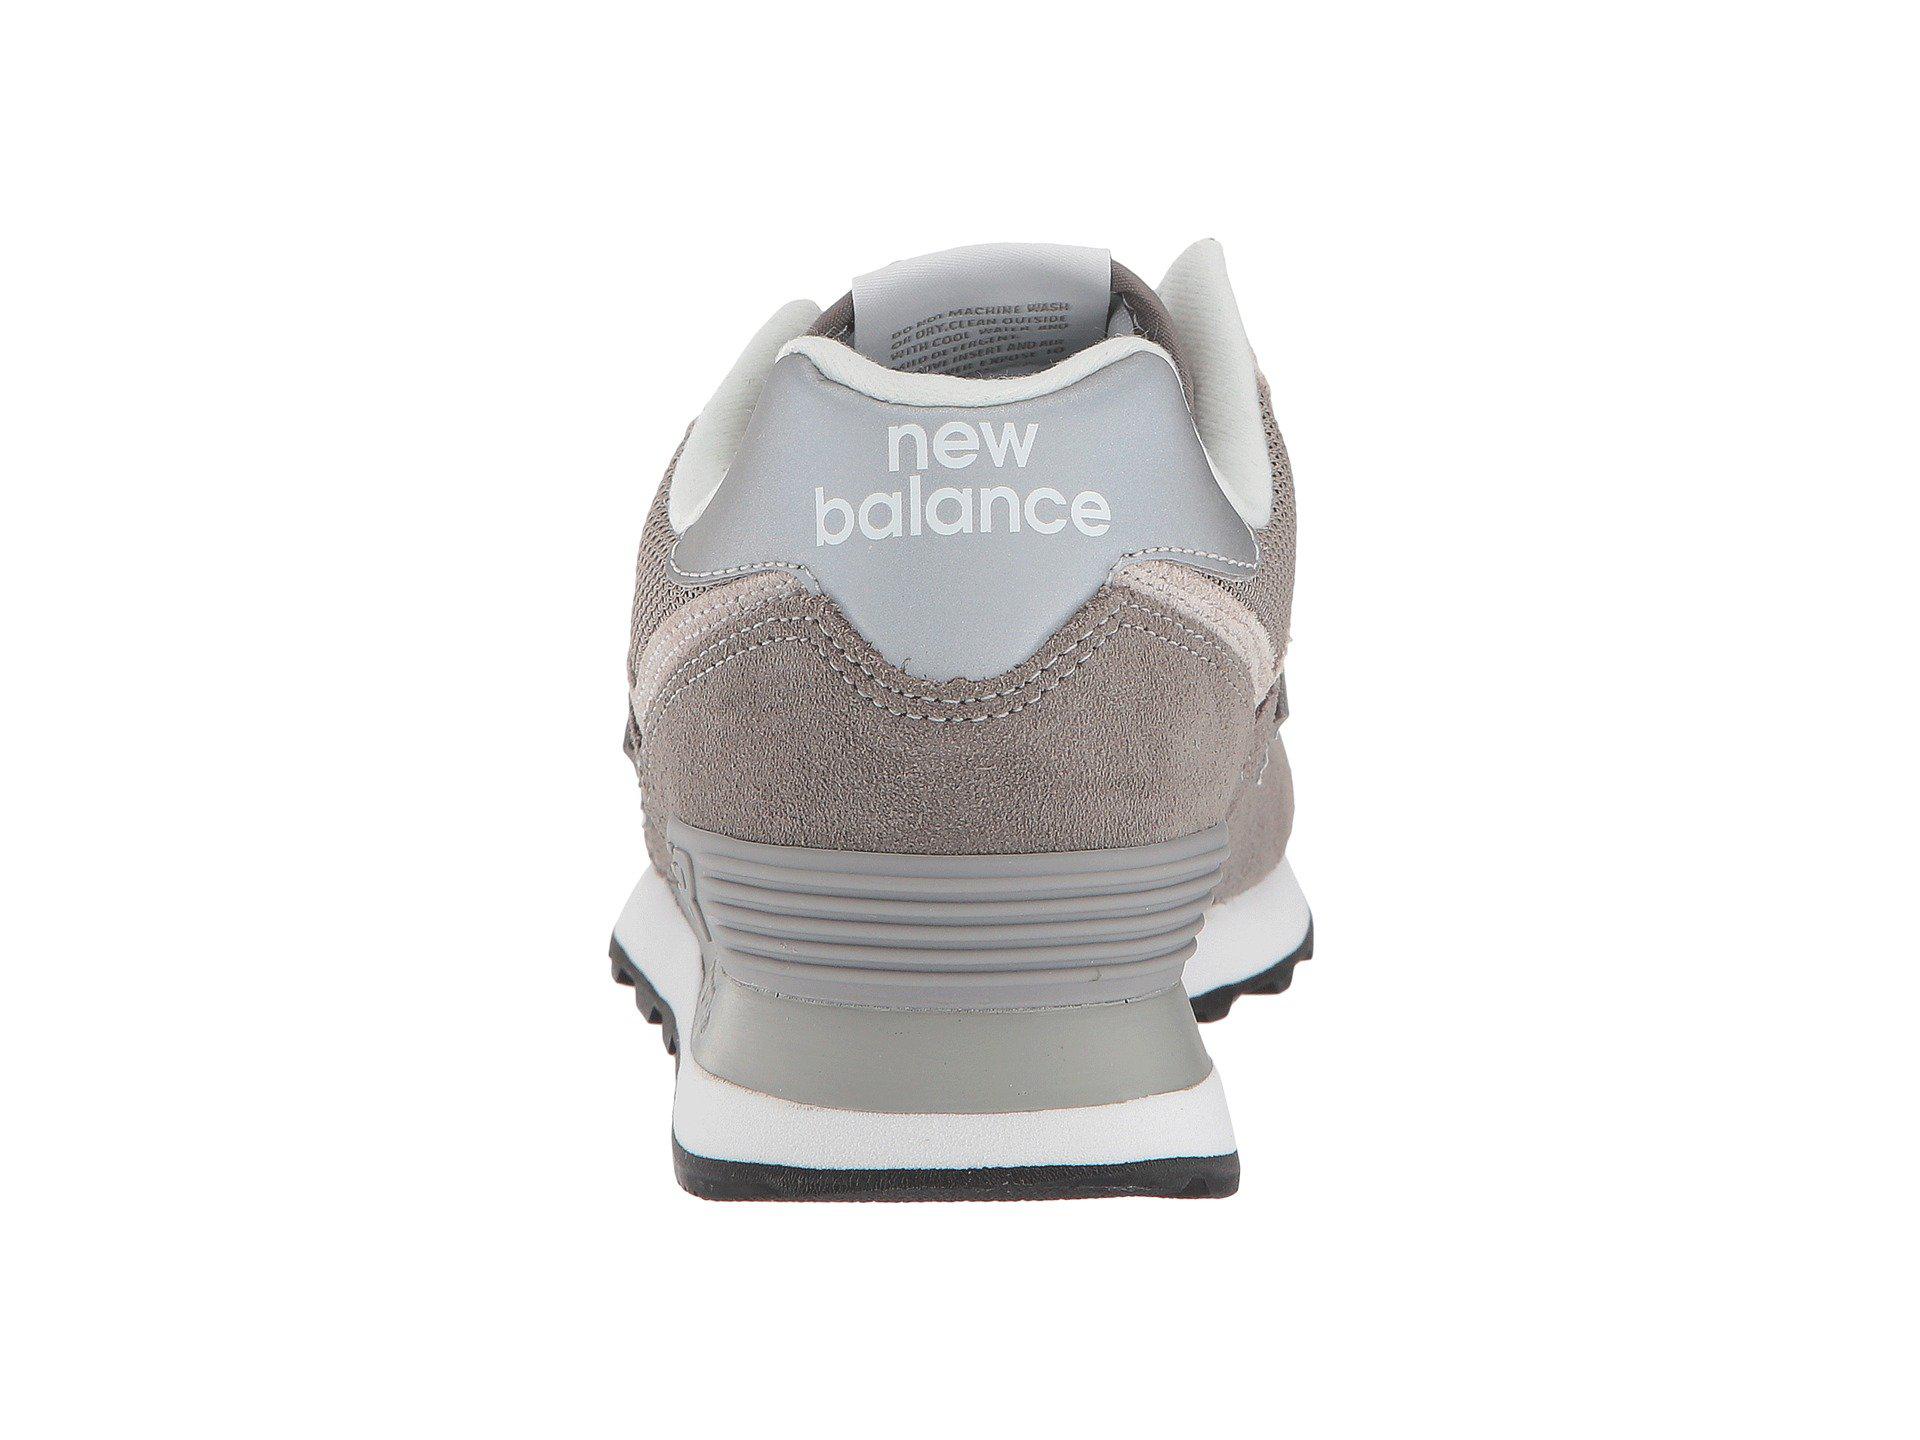 New Balance Suede Wl574v2 (white/white) Women's Running Shoes in Grey/White  (Gray) | Lyst